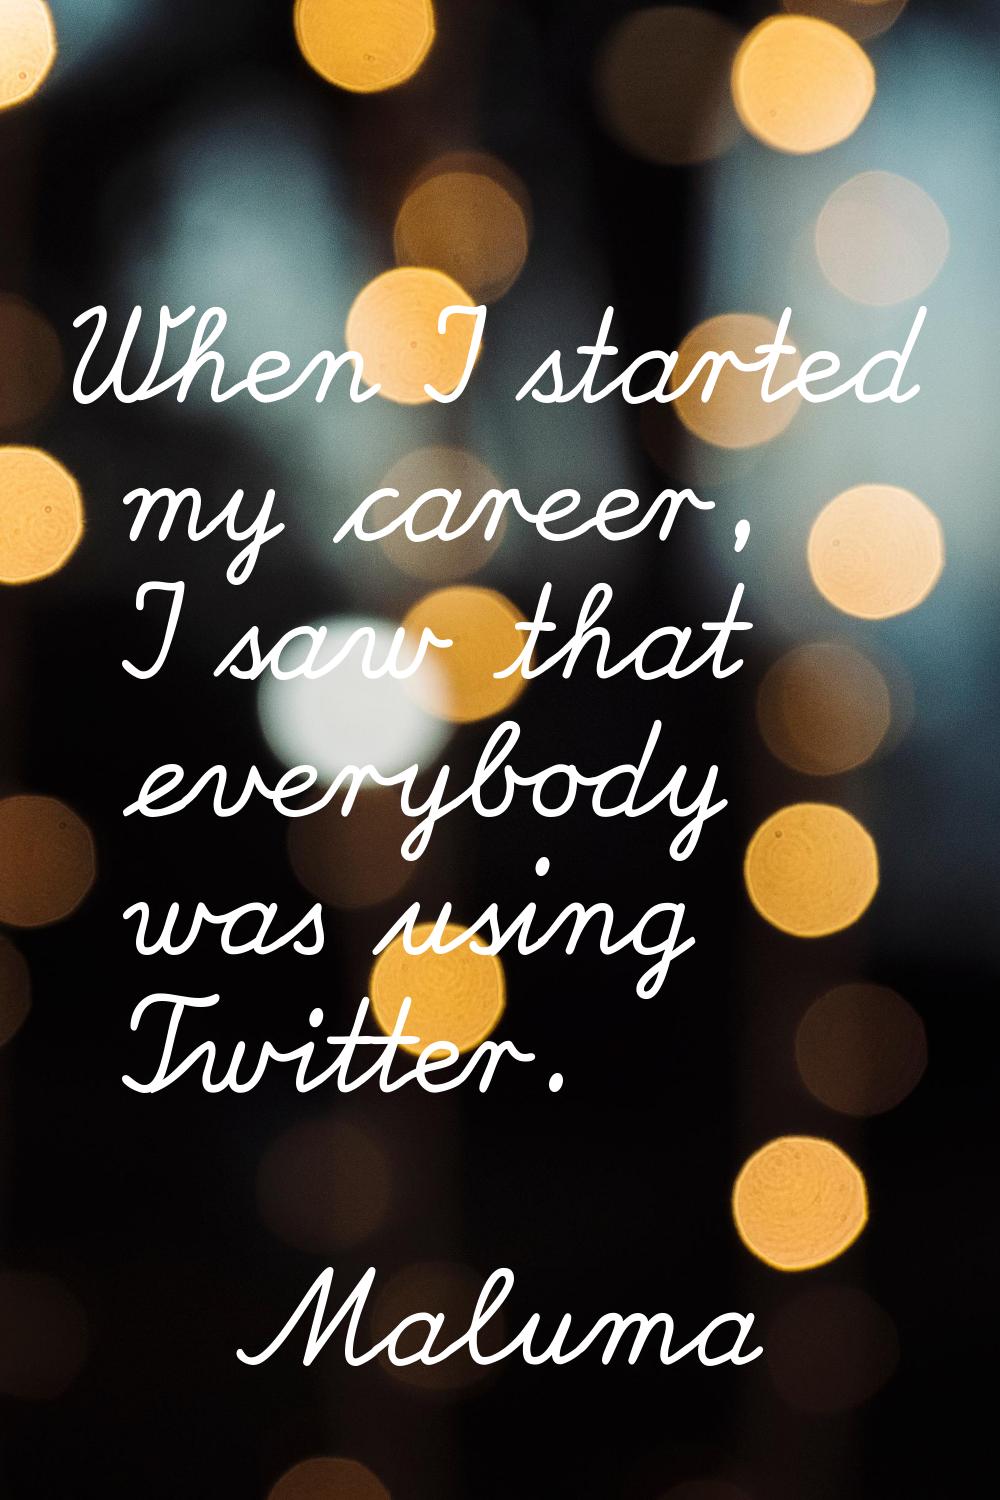 When I started my career, I saw that everybody was using Twitter.